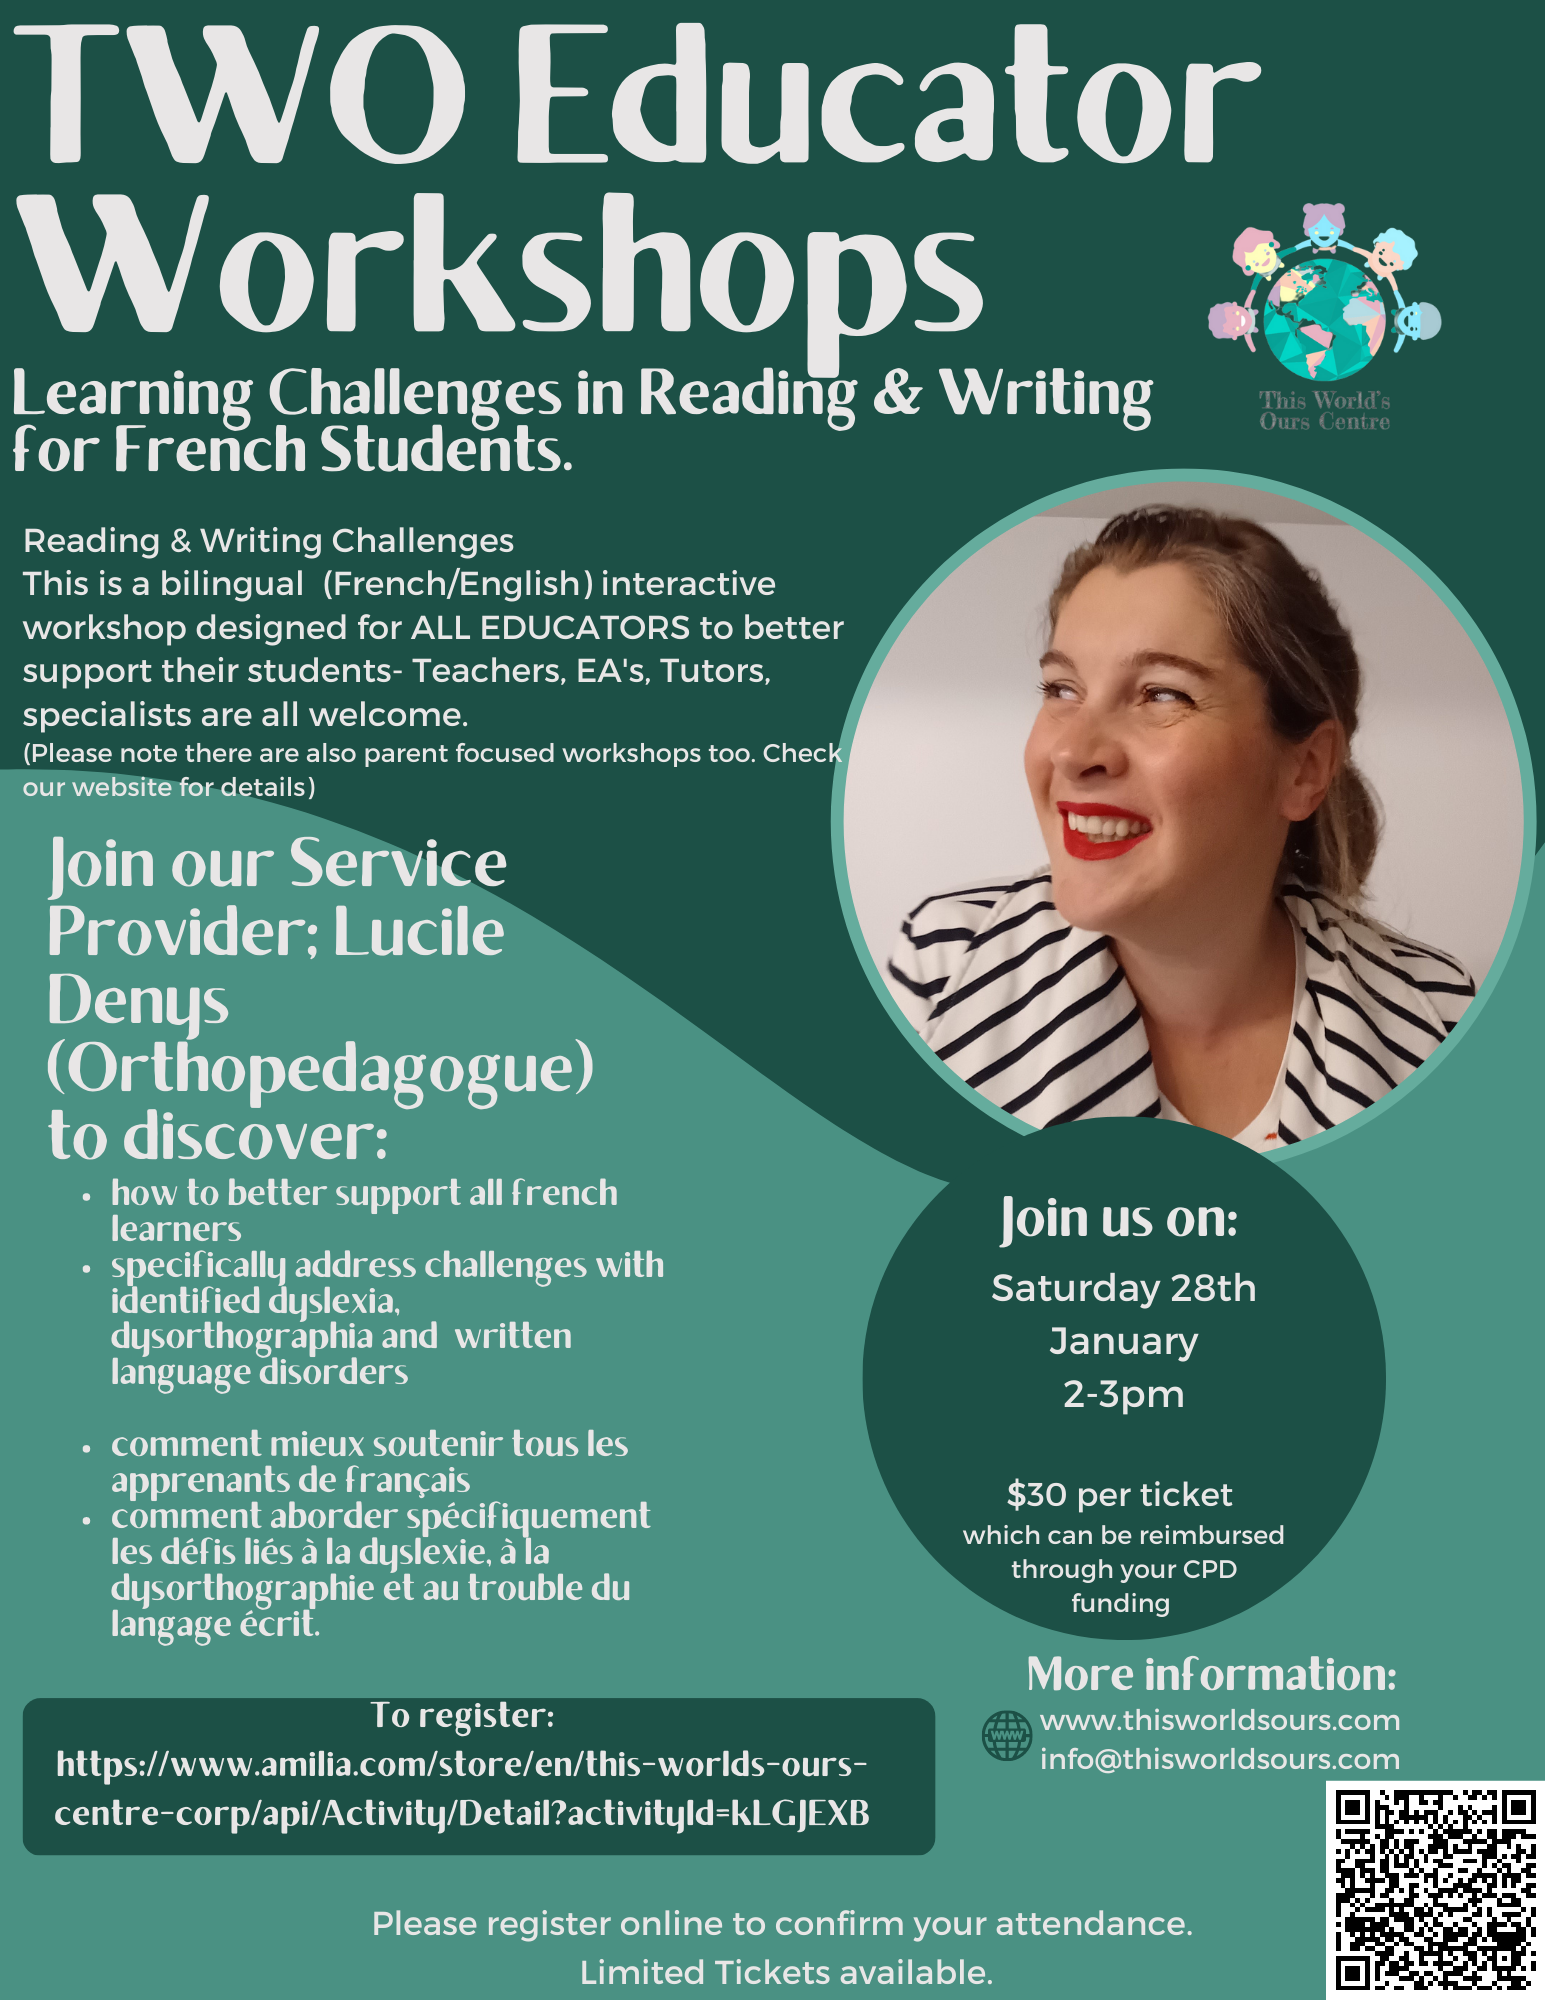 TWO Educator Workshop: Challenges in Reading & Writing for French Learners